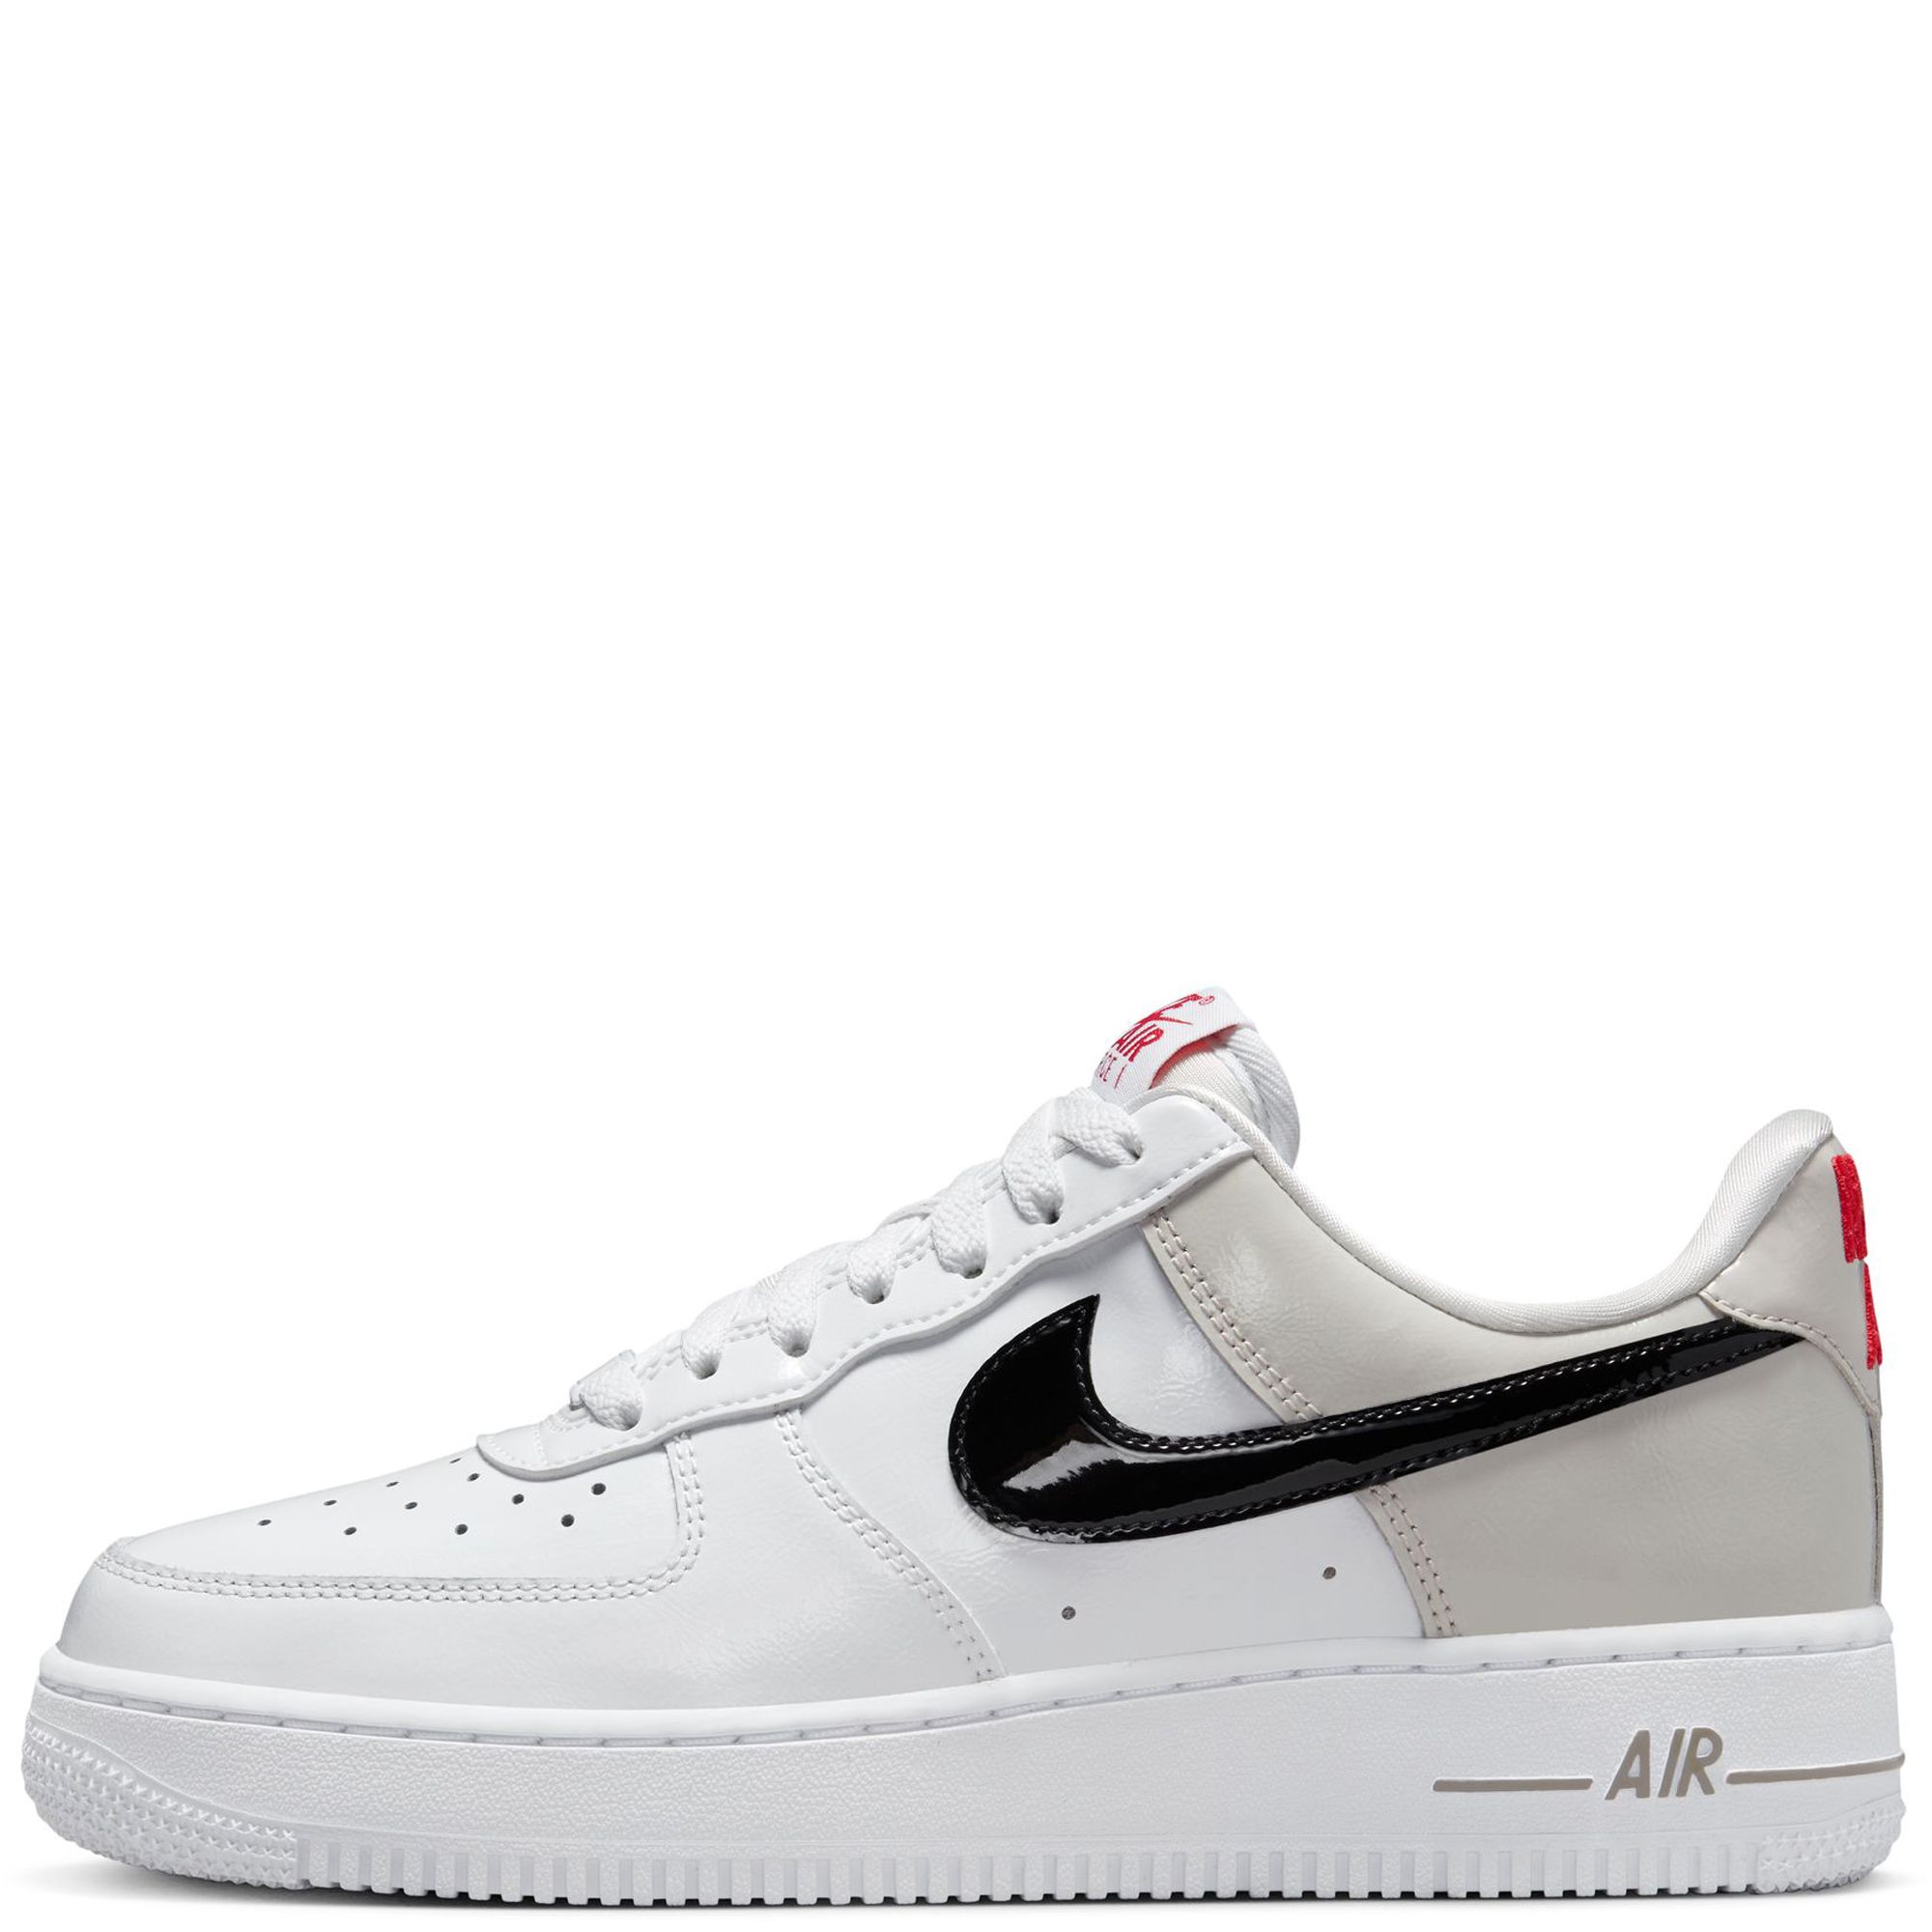 nike air force wedges white and black shoes women, The Best Sports Bras  For Different Activities